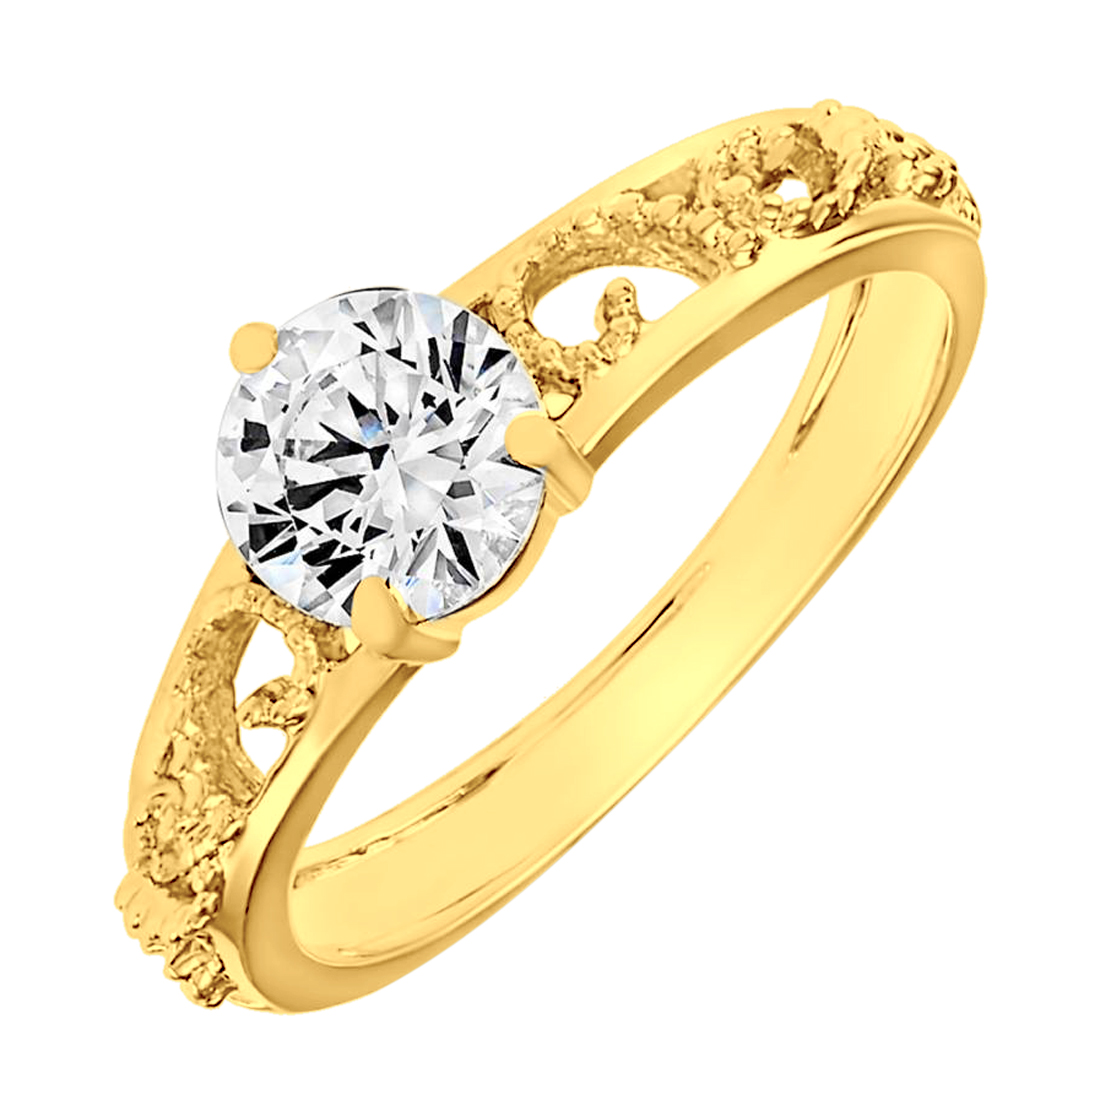 Sukai Jewels Solitaire Gold Plated Alloy   Brass Cubic Zirconai Fimger Ring for Women   Girls [SFR854G]